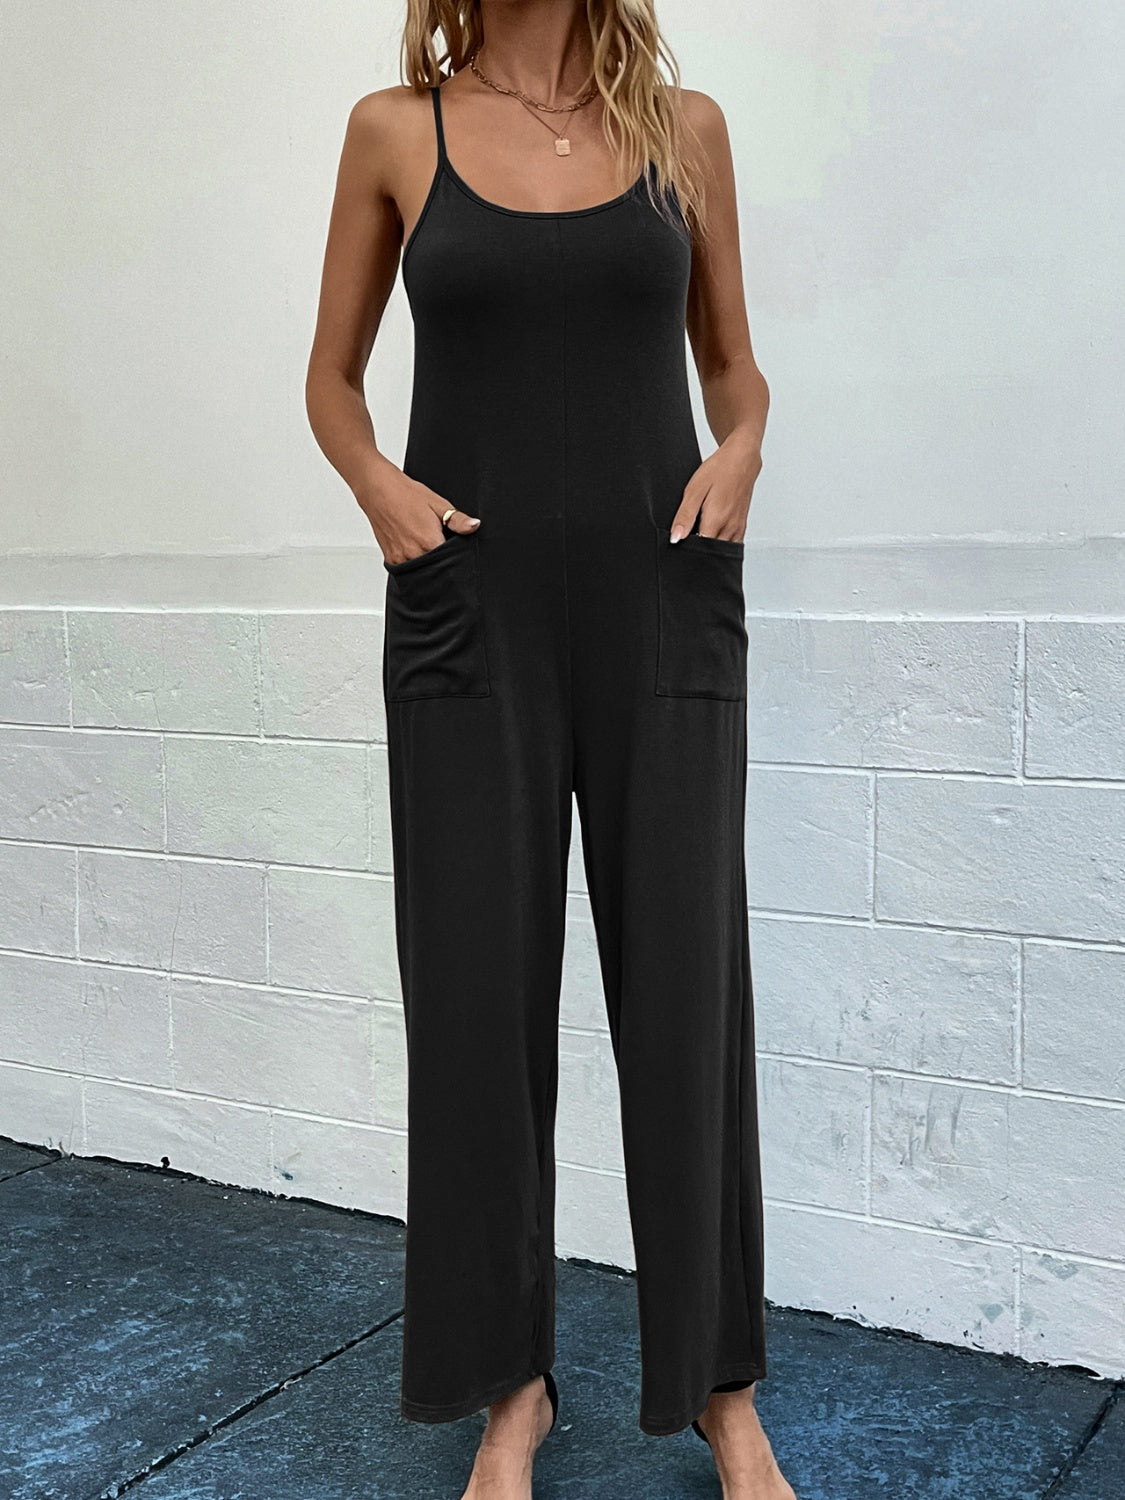 Pocketed Spaghetti Strap Wide Leg Jumpsuit